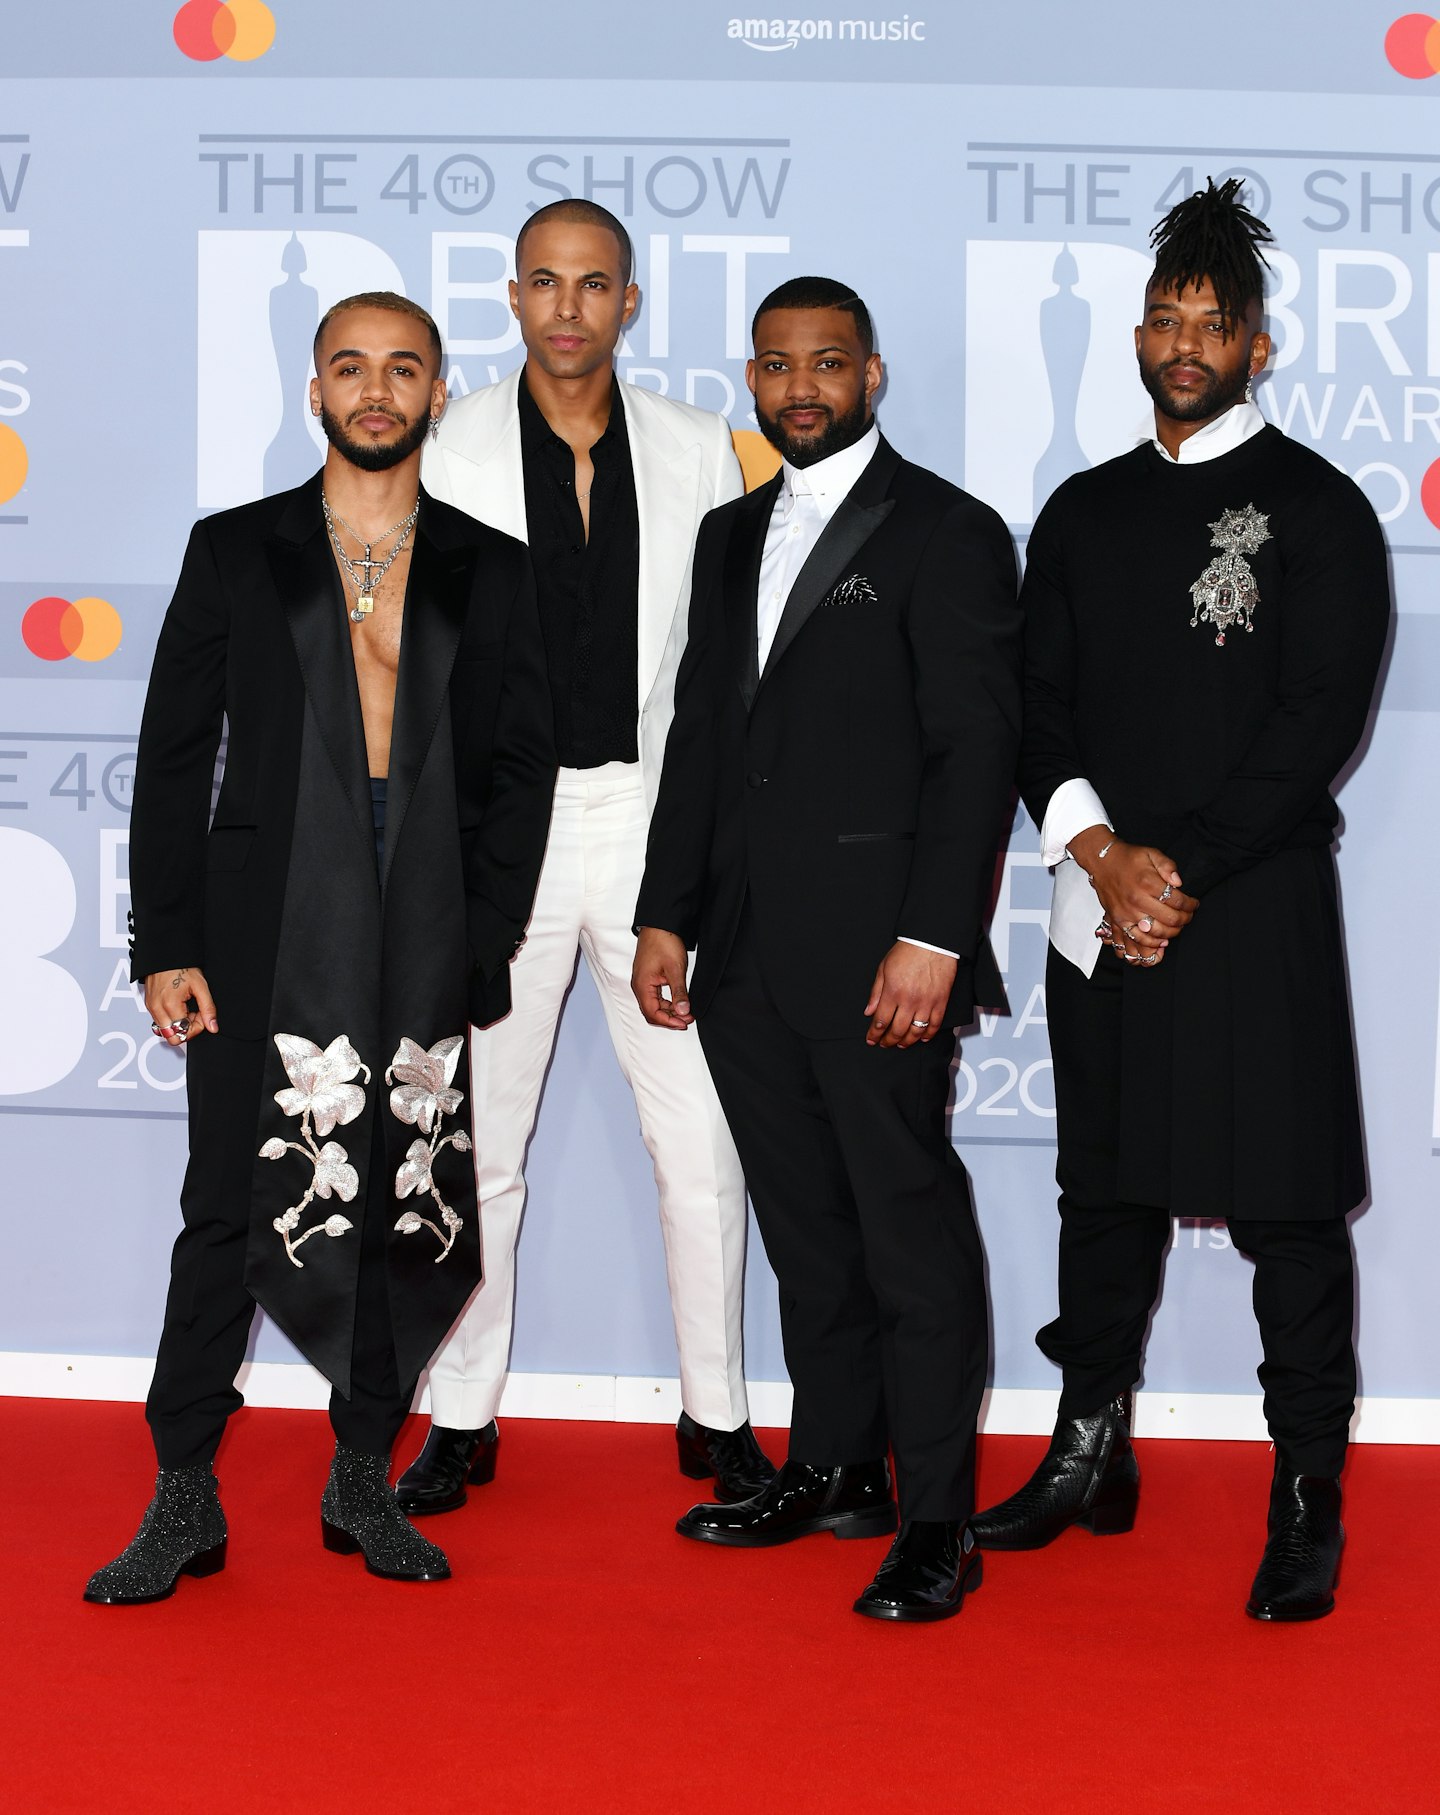 JLS returned to the red carpet in a variety of almost-matching looks